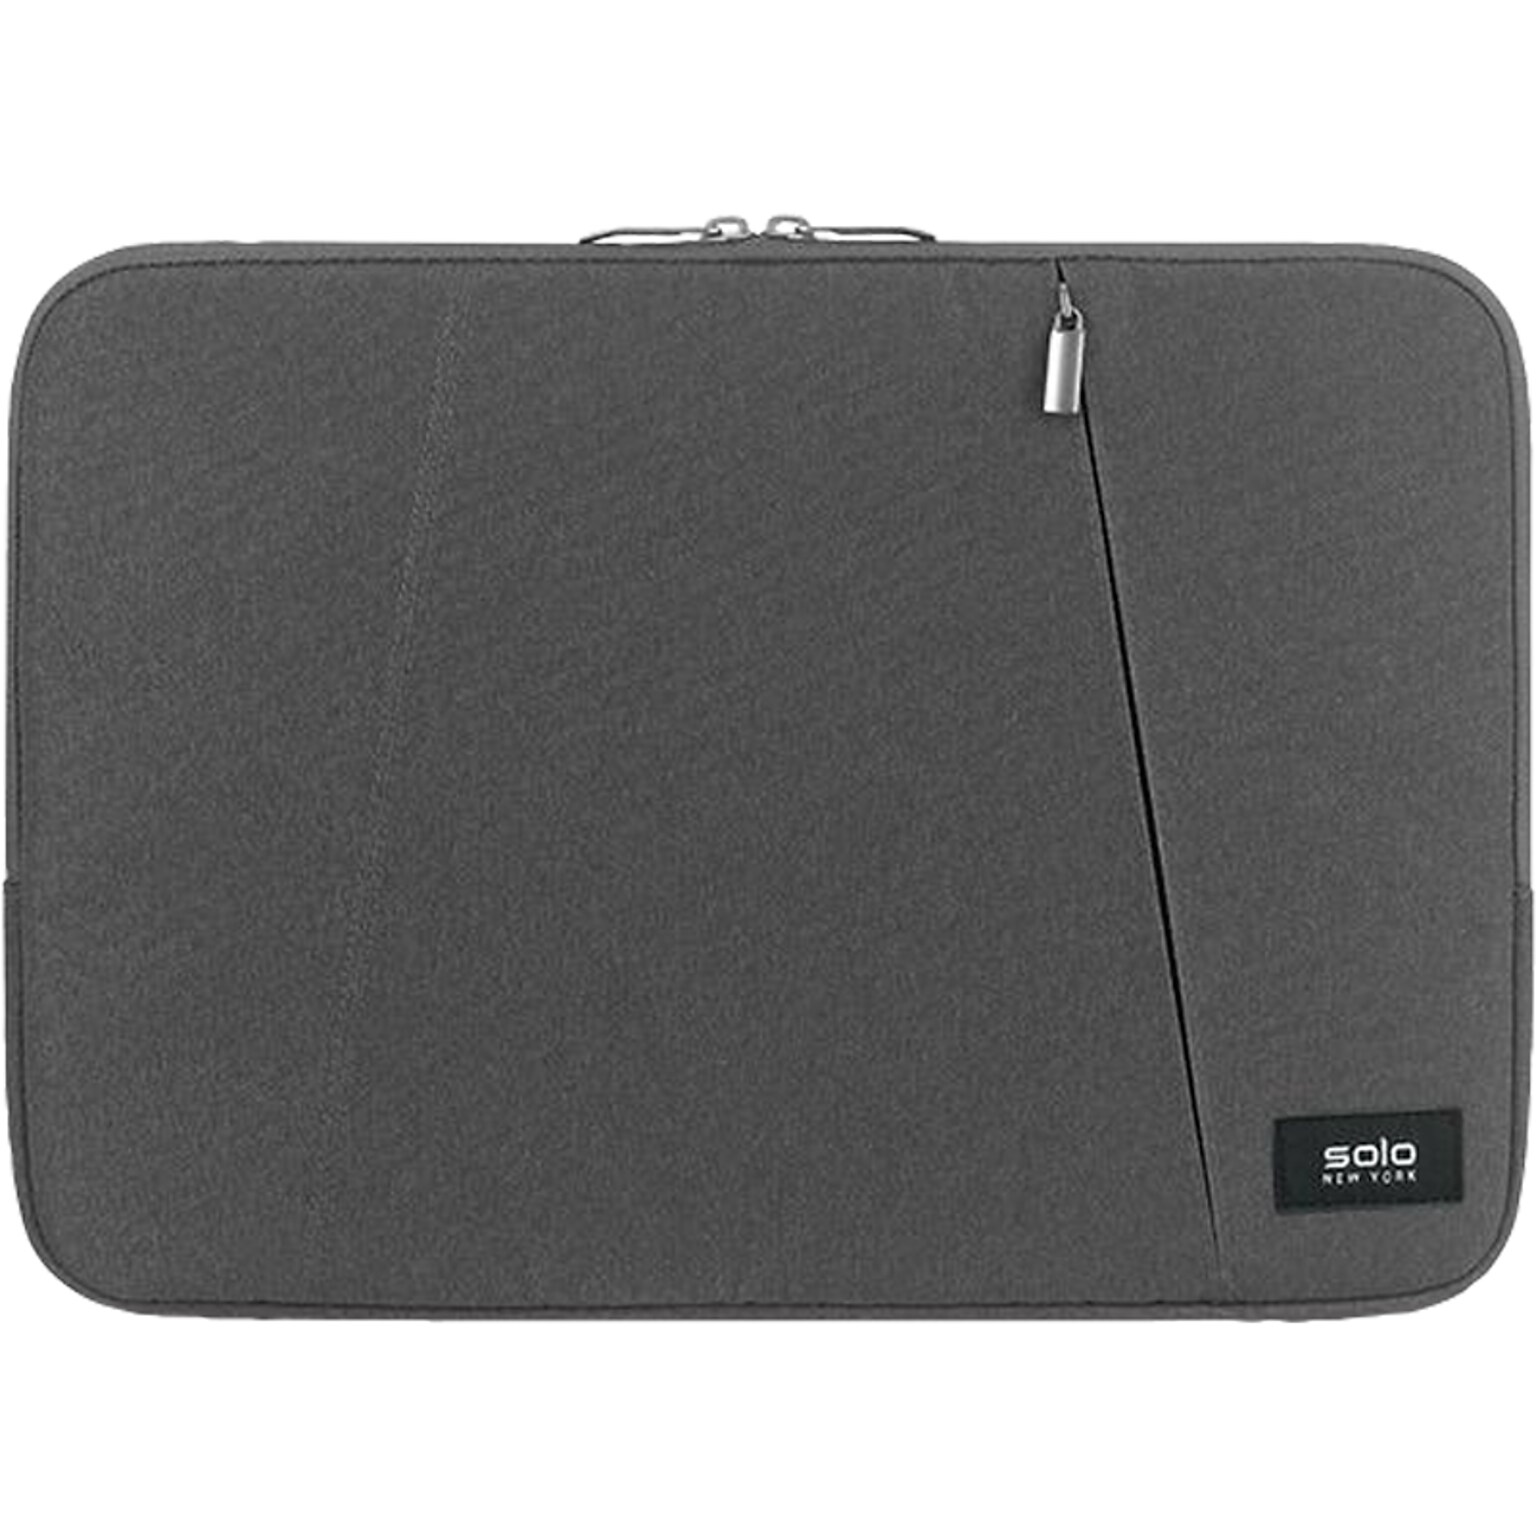 Solo New York Oswald Polyester Laptop Sleeve for 15.6 Laptops, Gray (SLV1615-10)